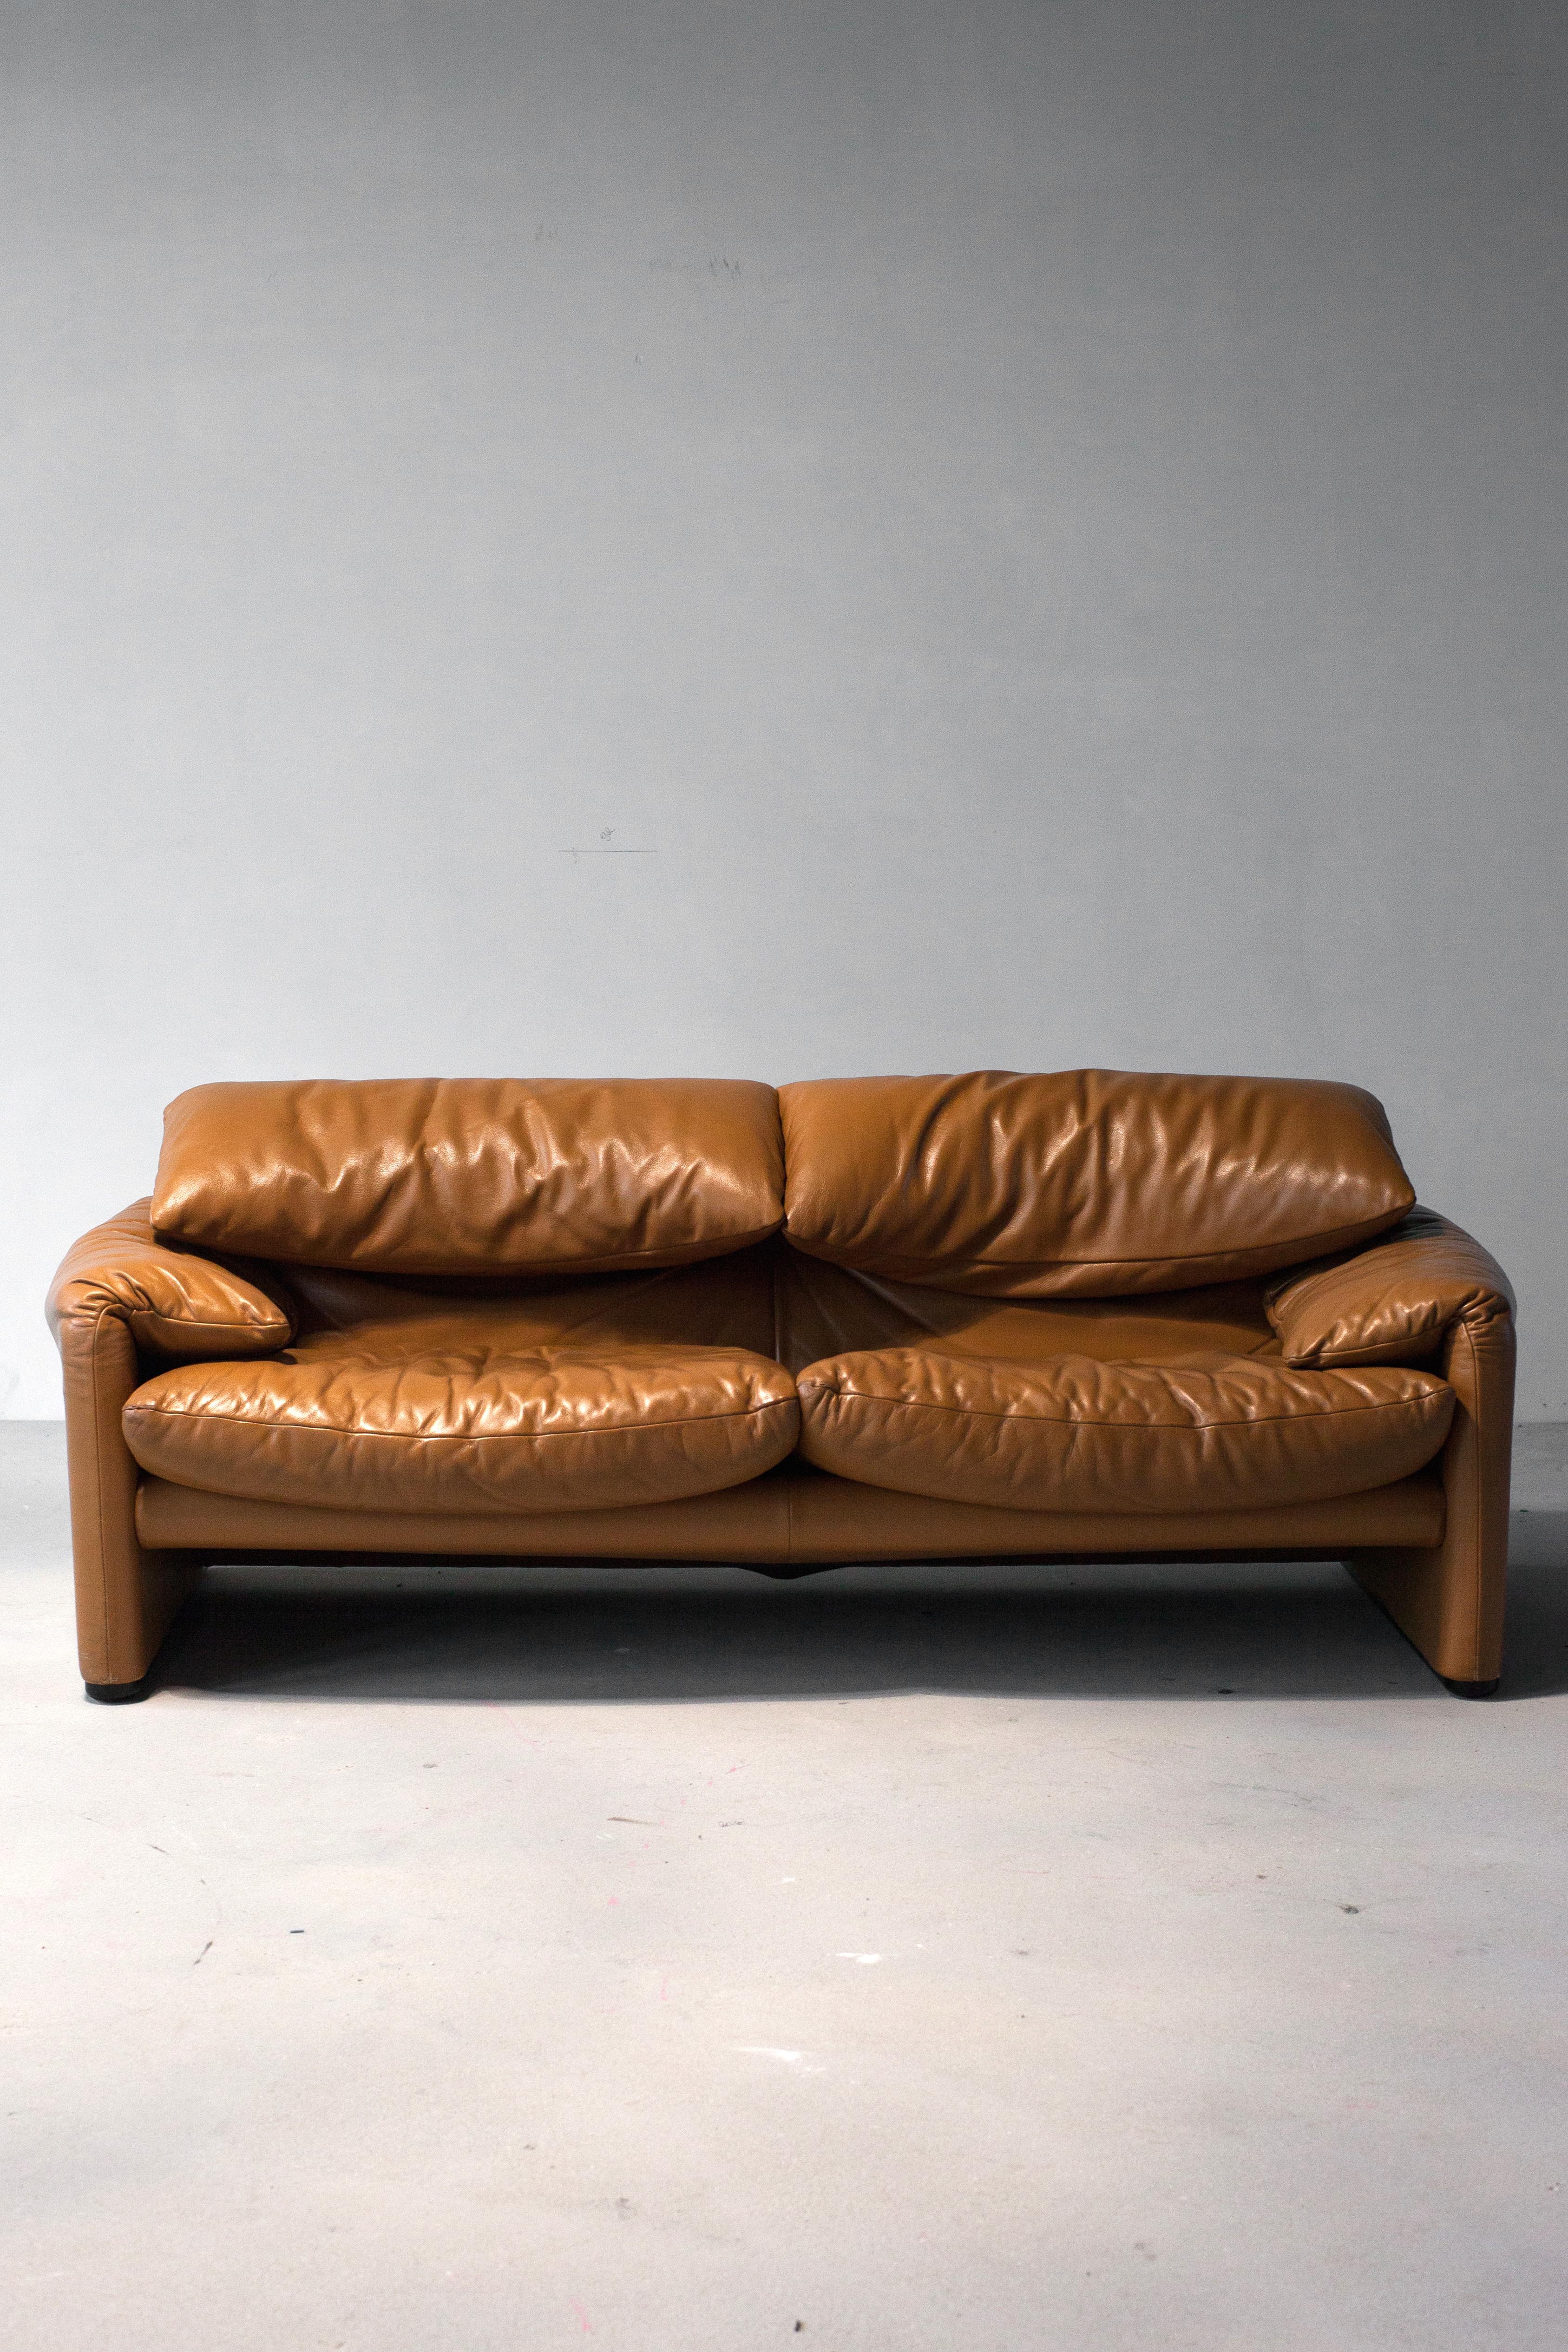 With these beautiful cognac leather pair of Maralunga sofa's you will definitely spice up your interior. This famous design was conceived by Vico Magistretti for Cassina in 1973. This specific pair was produced in the 2000s. This also means that the